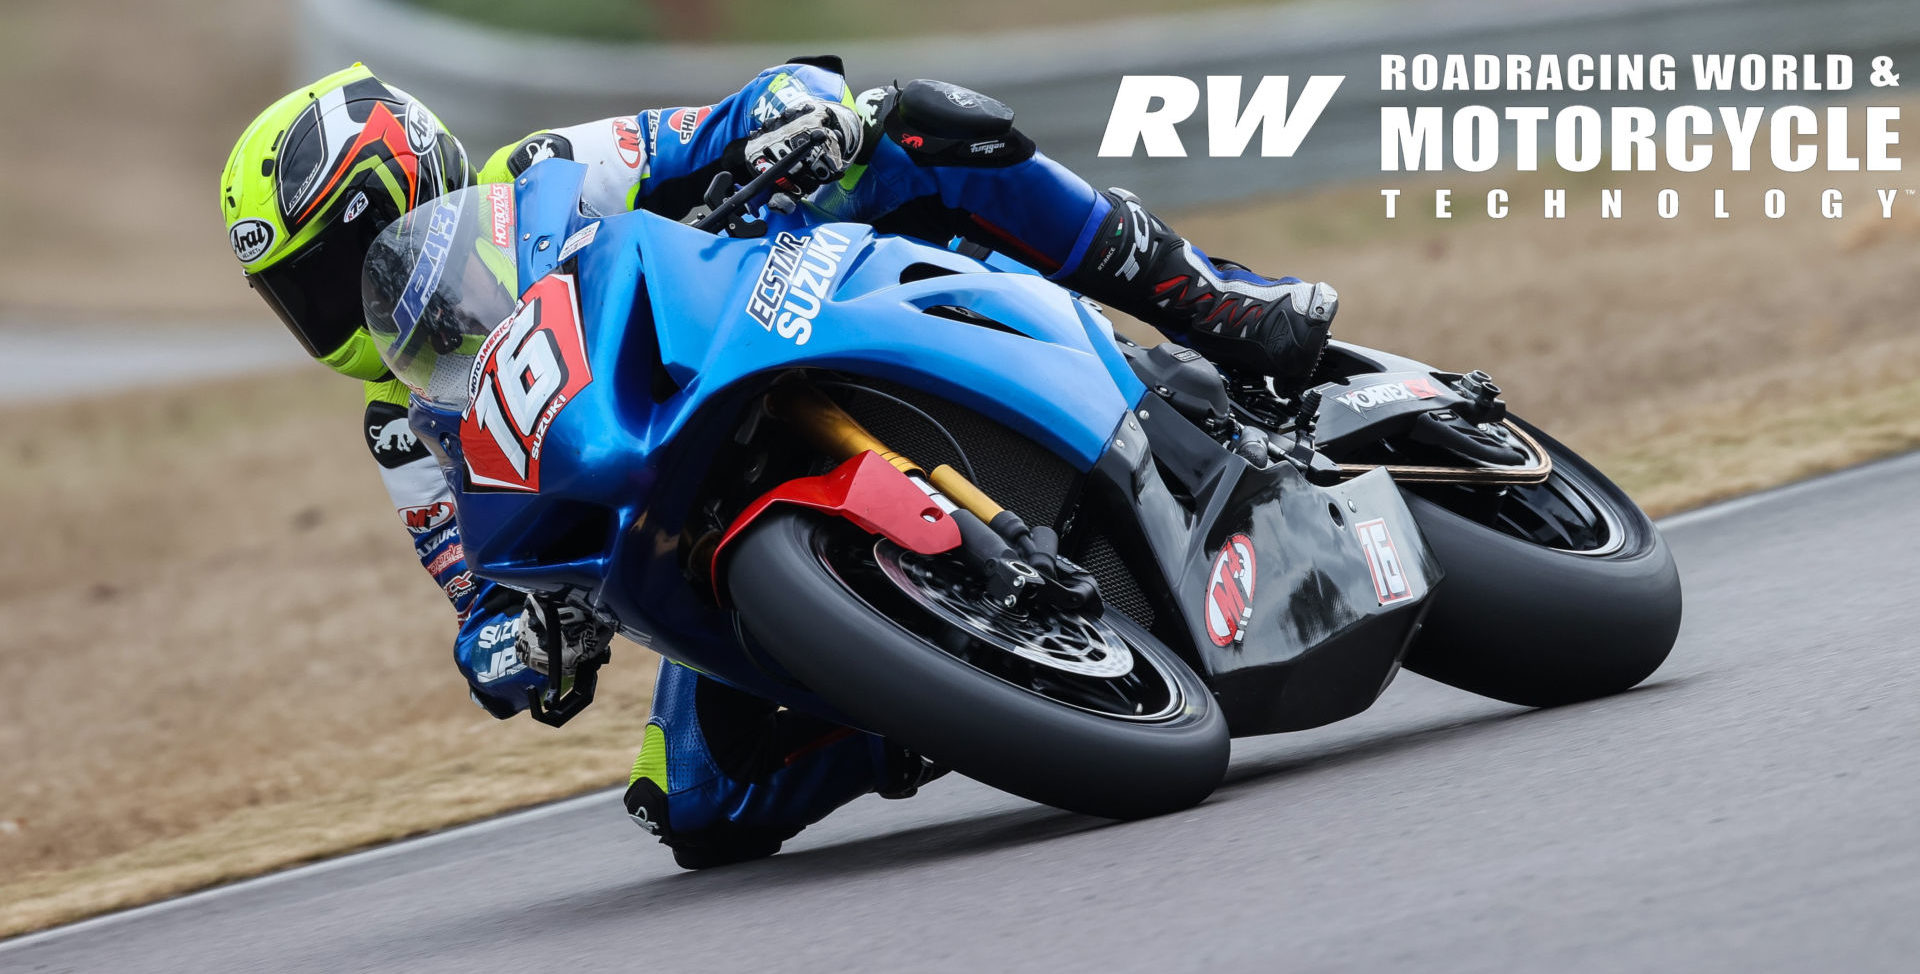 Alex Dumas (16) at speed on his M4 ECSTAR Suzuki GSX-R1000R during the official 2020 MotoAmerica pre-season test at Barber Motorsport Park. Photo by Brian J. Nelson.